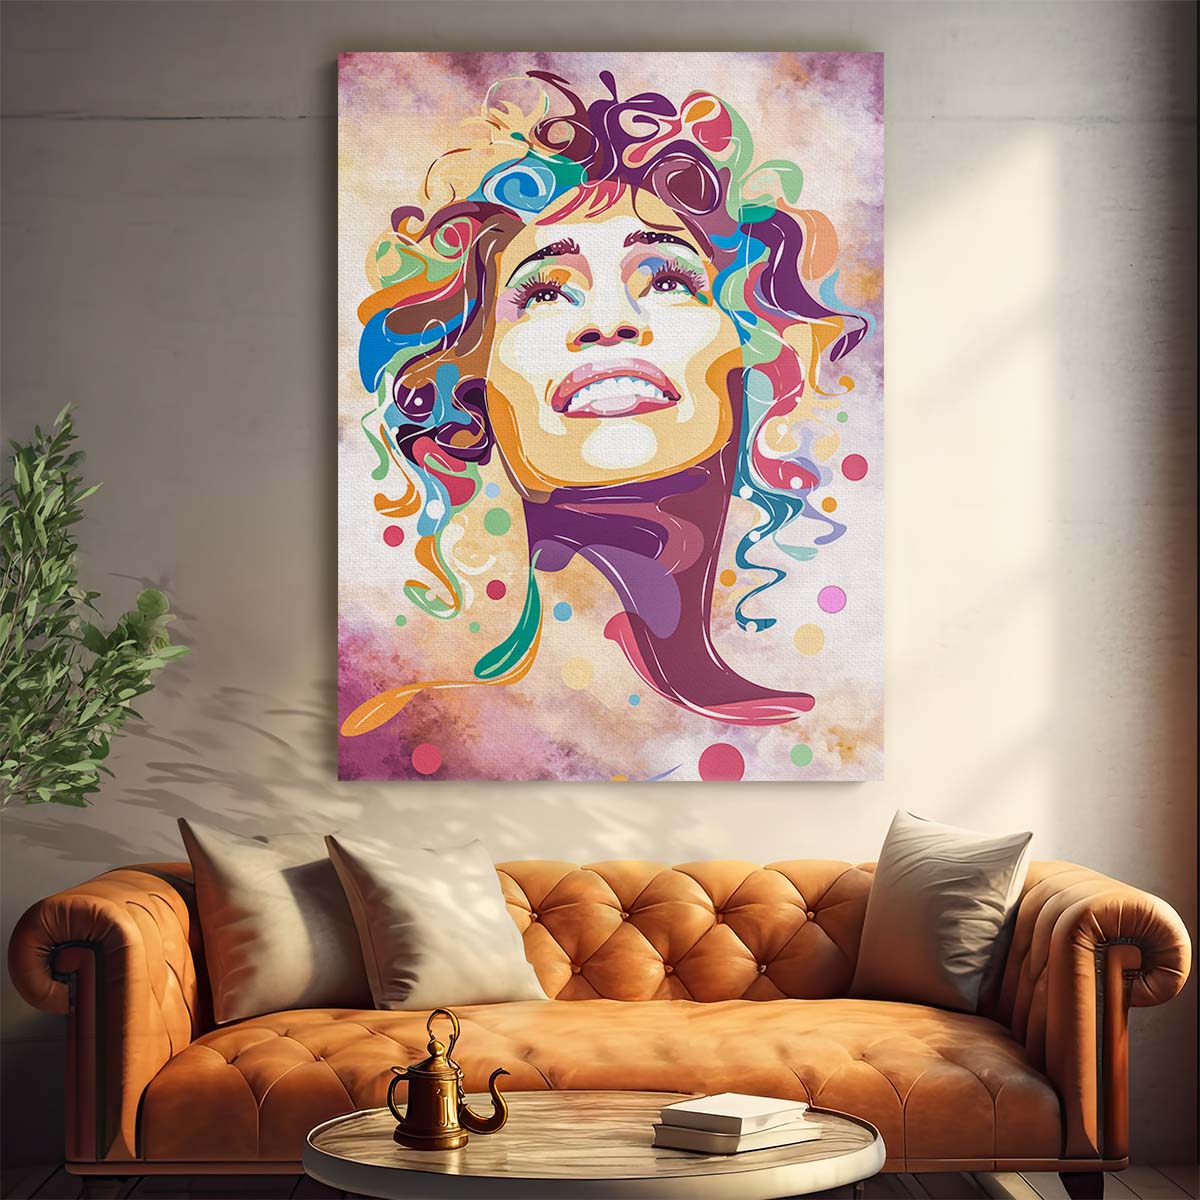 Whitney Houston Watercolor Wall Art by Luxuriance Designs. Made in USA.